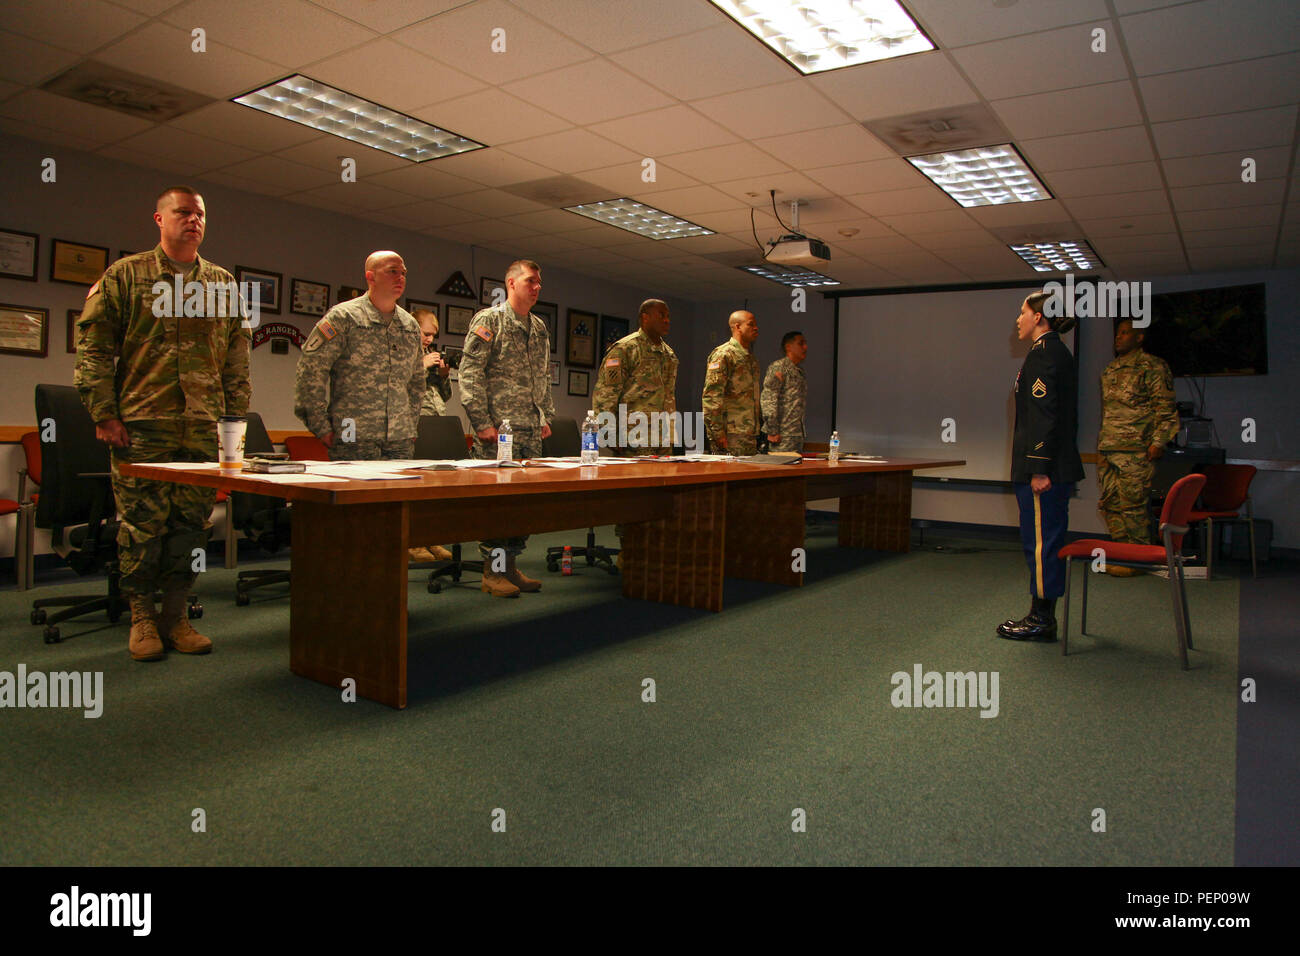 U.S. Army Staff Sgt. Patricia Ramirez, assigned to 55th Signal Company (Combat Camera), recites the Creed of the Noncommissioned Officer to the members of the board at Fort George G. Meade, Md., Dec. 17, 2015. Ramirez participated in the quarterly board to compete for the best NCO of the Quarter. (U.S. Army photo by Spc. Pablo Chang/Released) Stock Photo